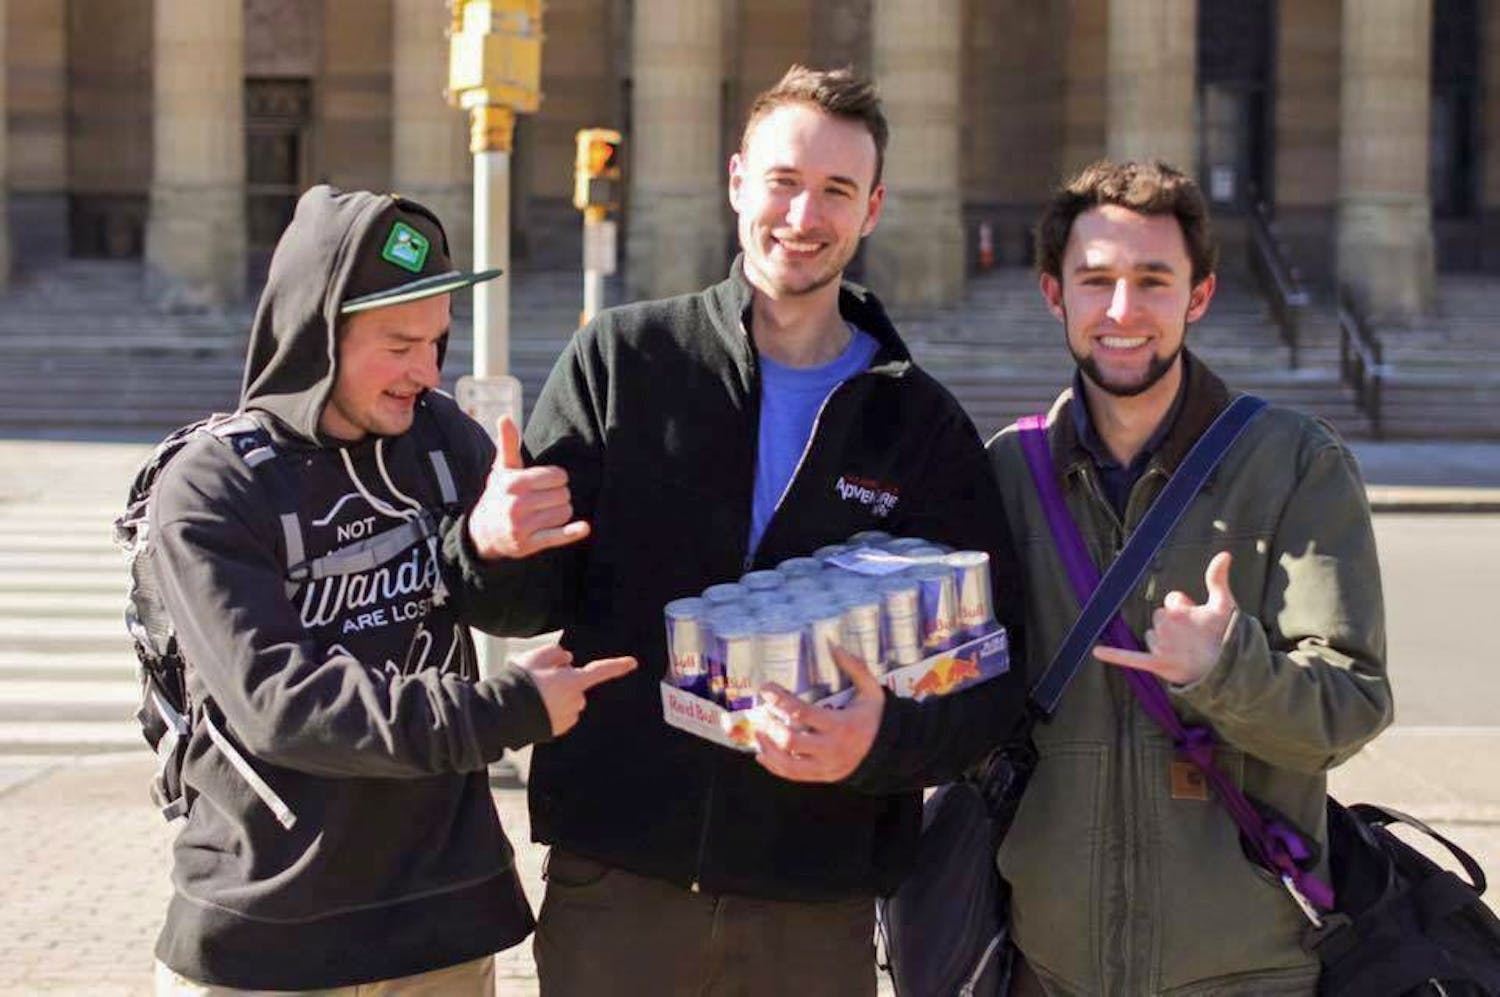 (From left to right) Jake Dixon, Chris Komin and&nbsp;George Gombert&nbsp;will be leaving for Berlin, Germany on April 12 to travel across the continent to Paris, France, only using cans of Red Bull as currency.